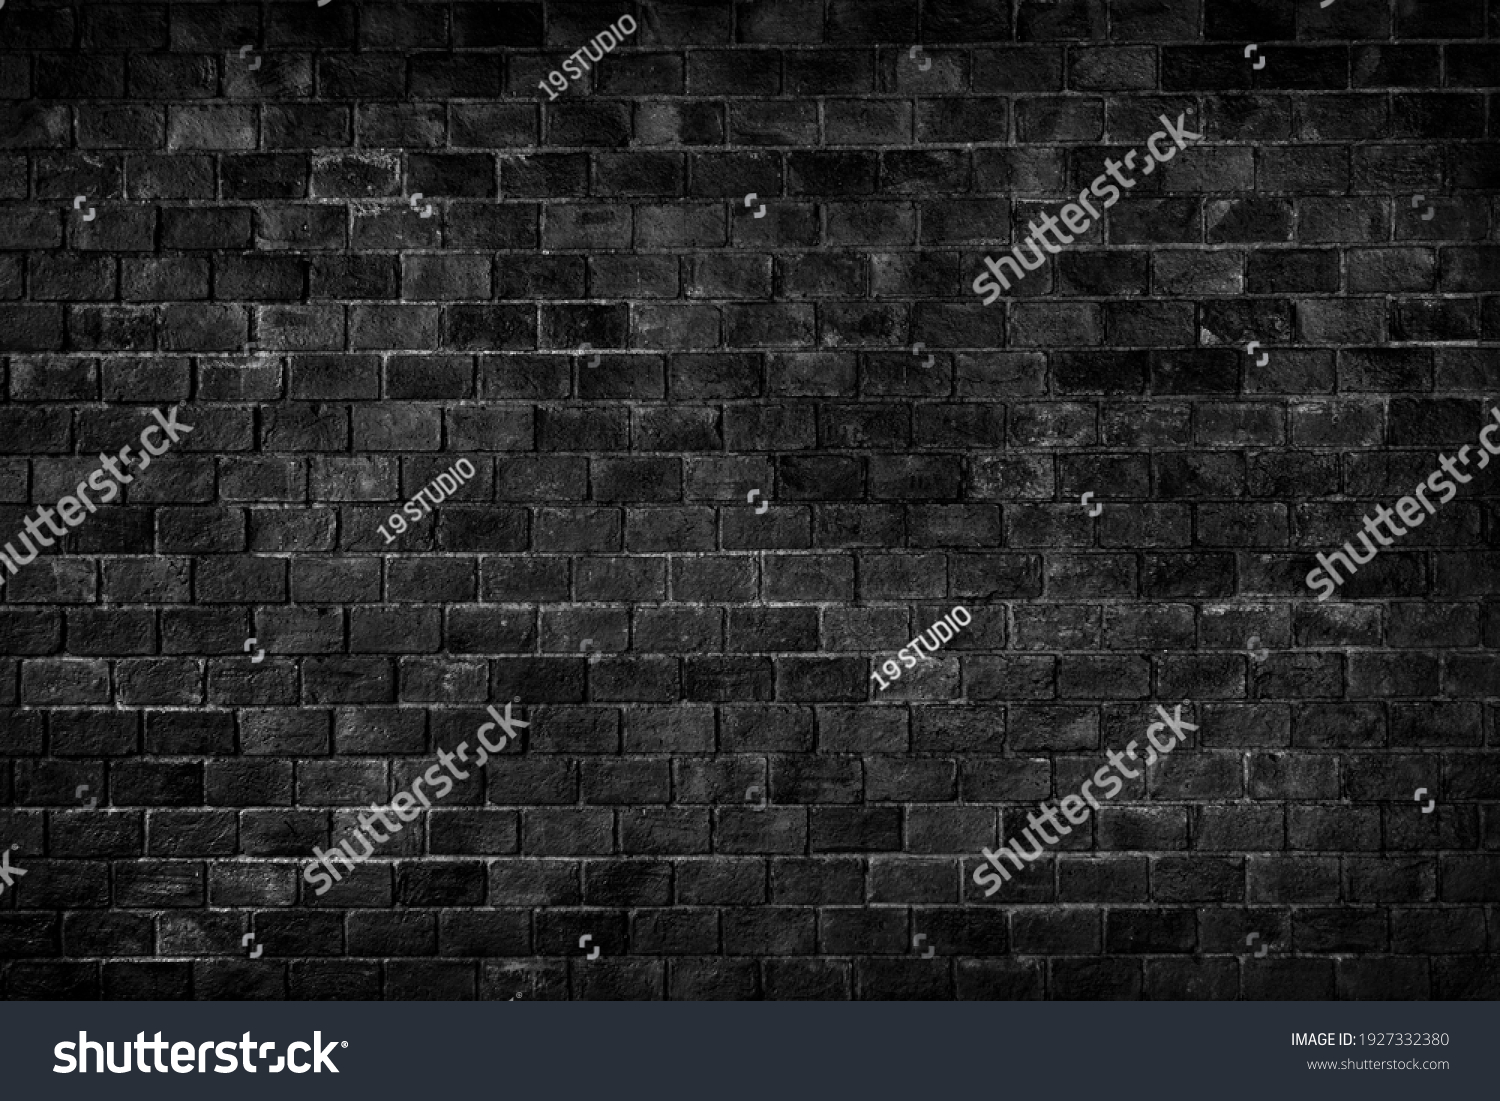 black texture with brick wall for background website or brickwork for design #1927332380